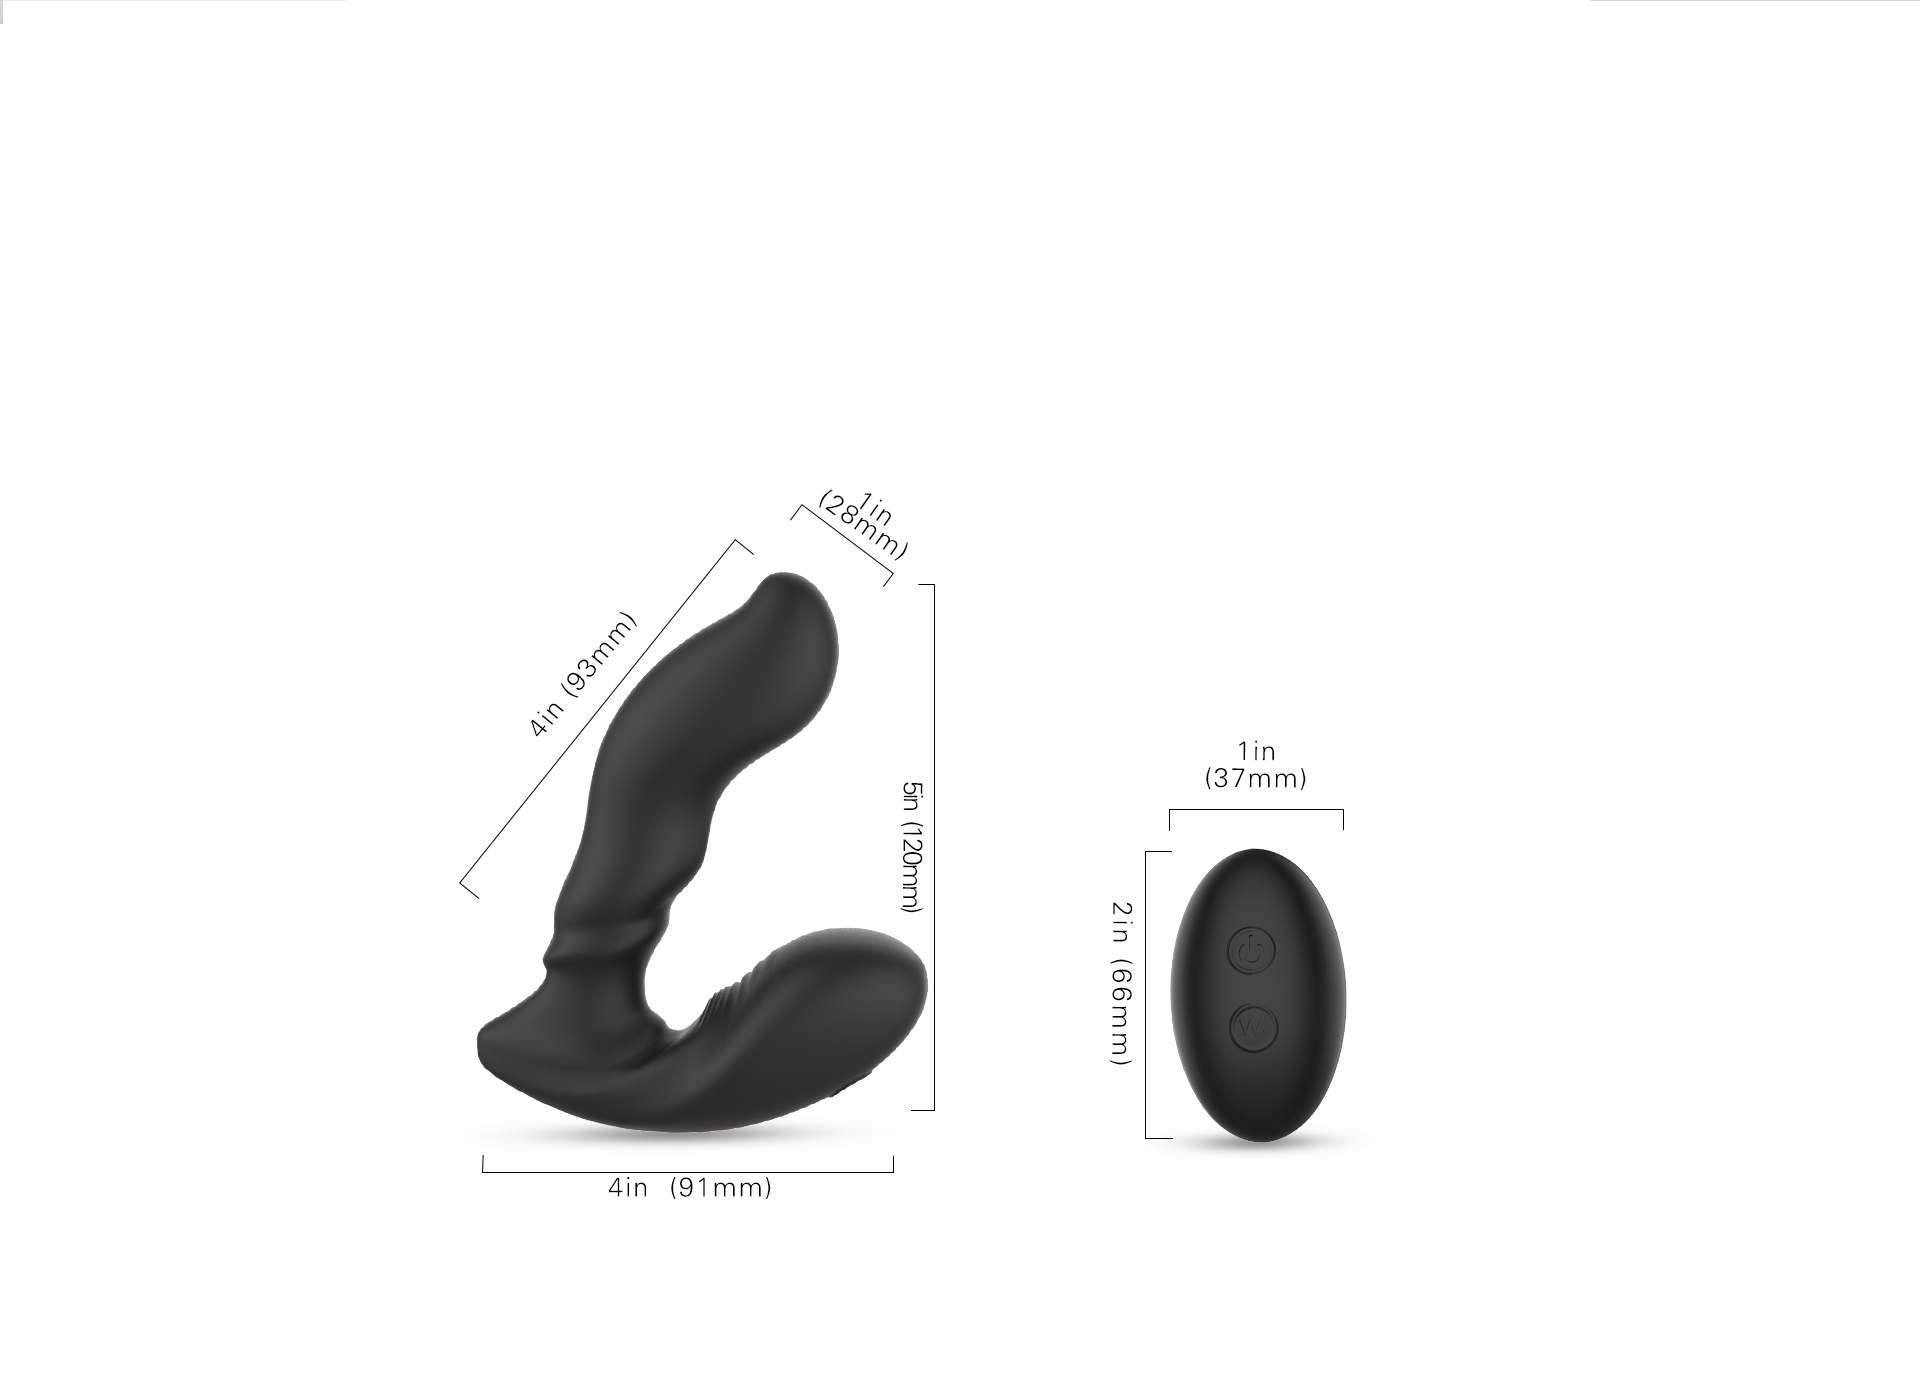 Anal Toys Anal Vibrator for Men Butt Plug Prostate Massage Double Motors Wireless Vibrator Sex Toys for Adult Erotic Toys-10